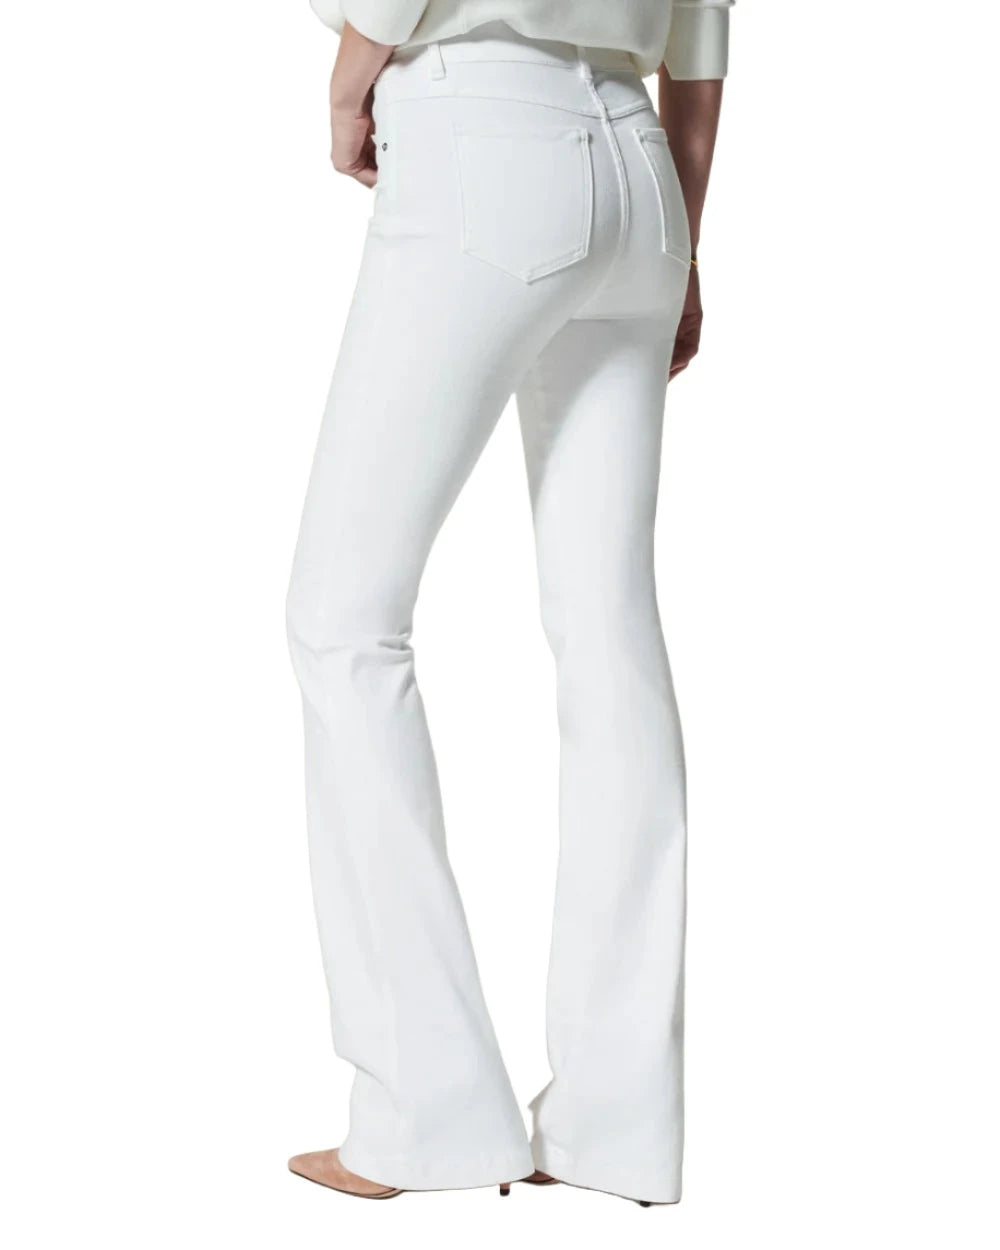 Spanx Flare Jeans - White back view.